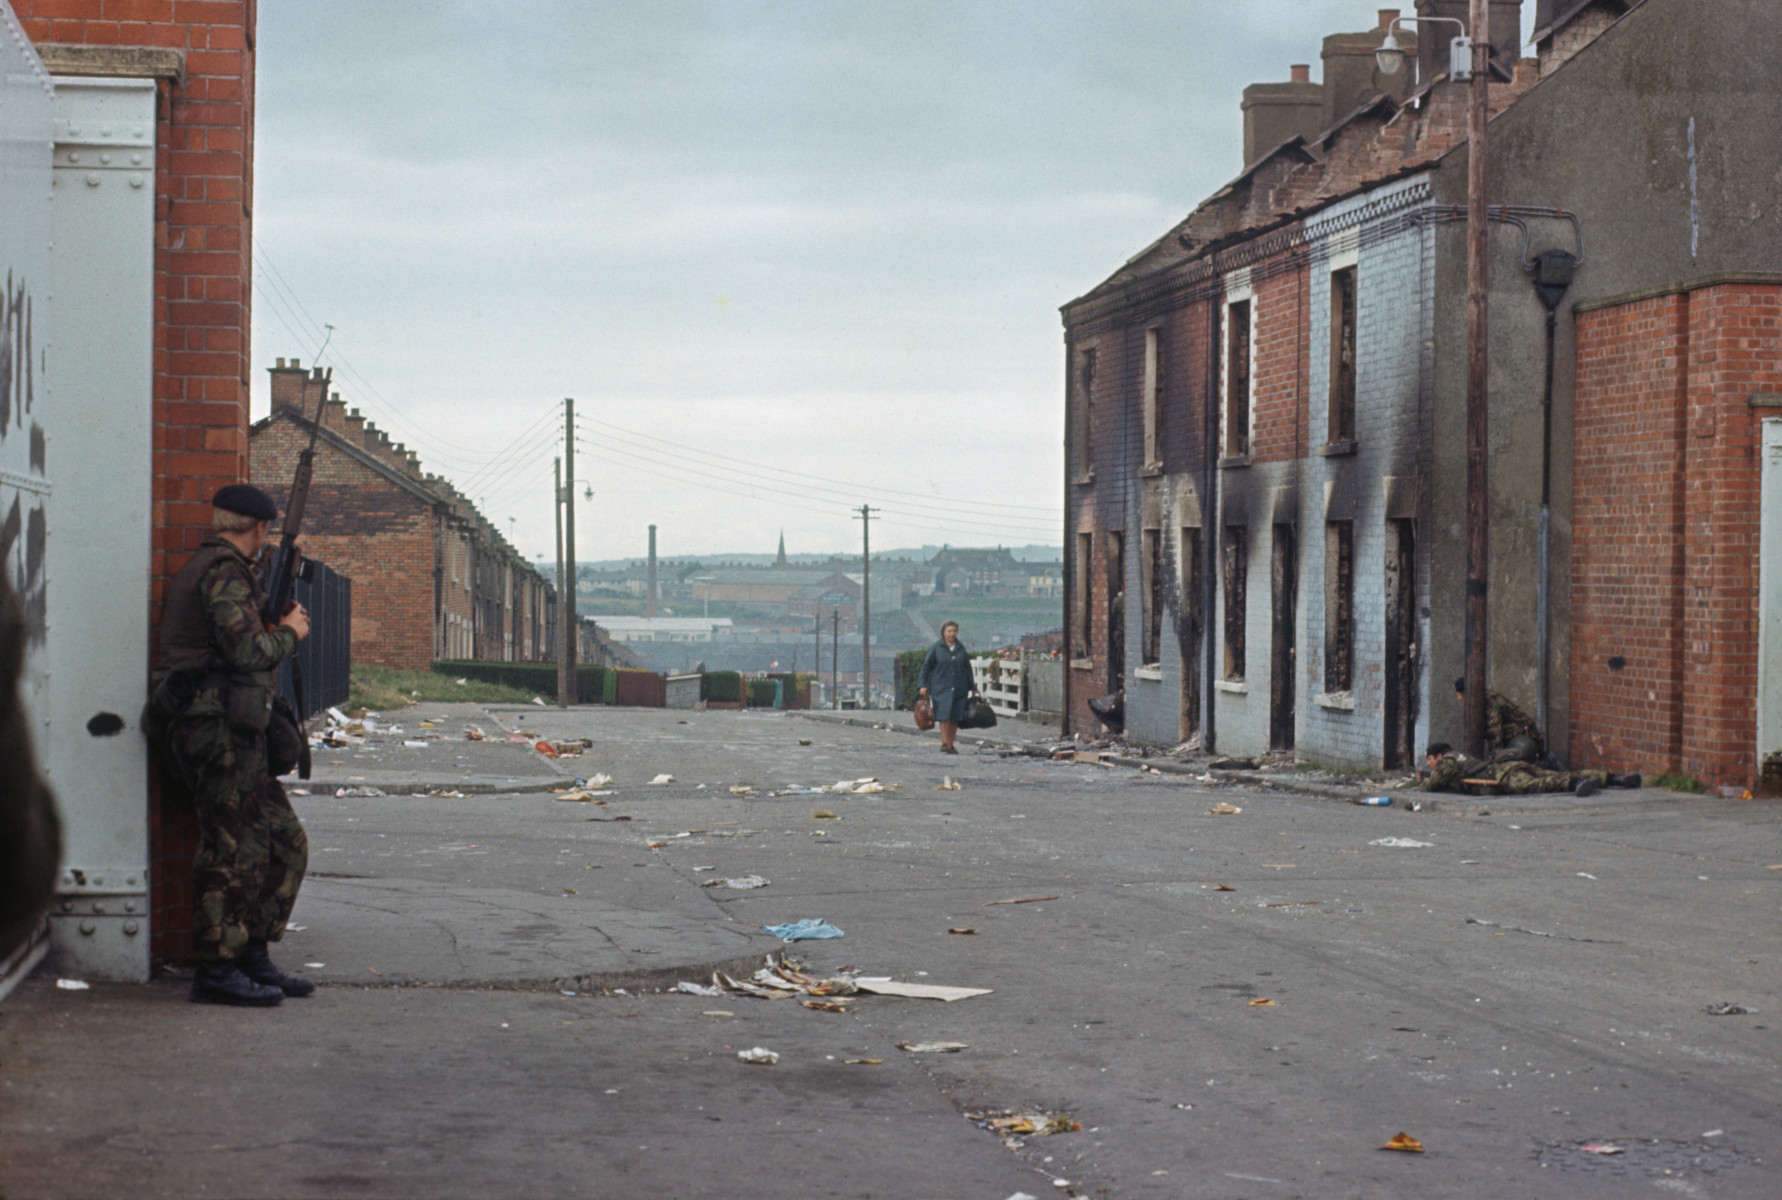 British Army soldier on the streets of the predominantly Catholic Ardoyne area of North Belfast, 1971